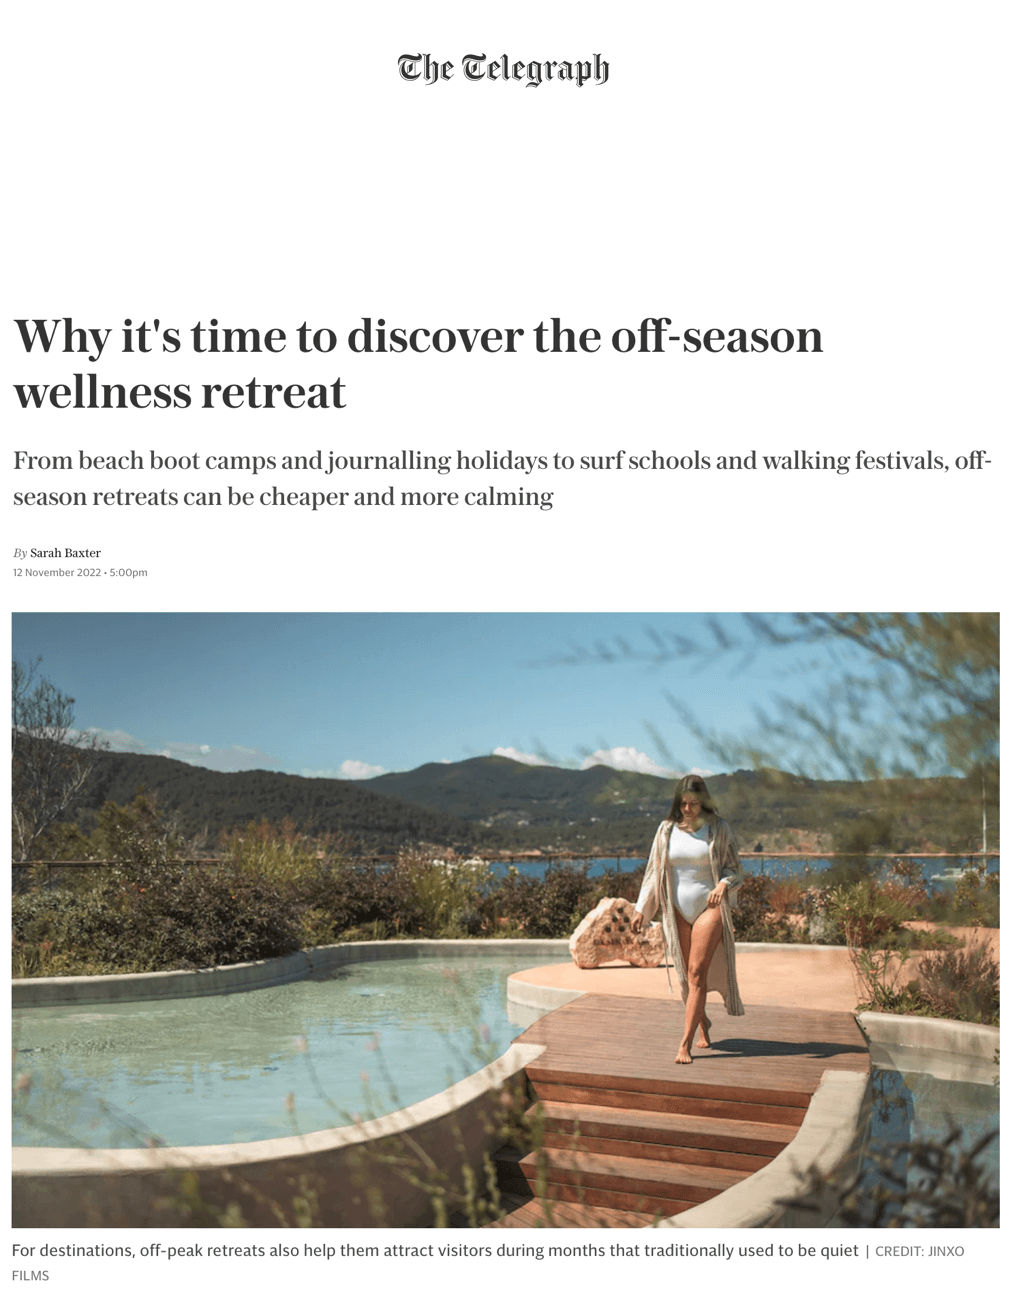 Why it's time to discover the off-season wellness retreat